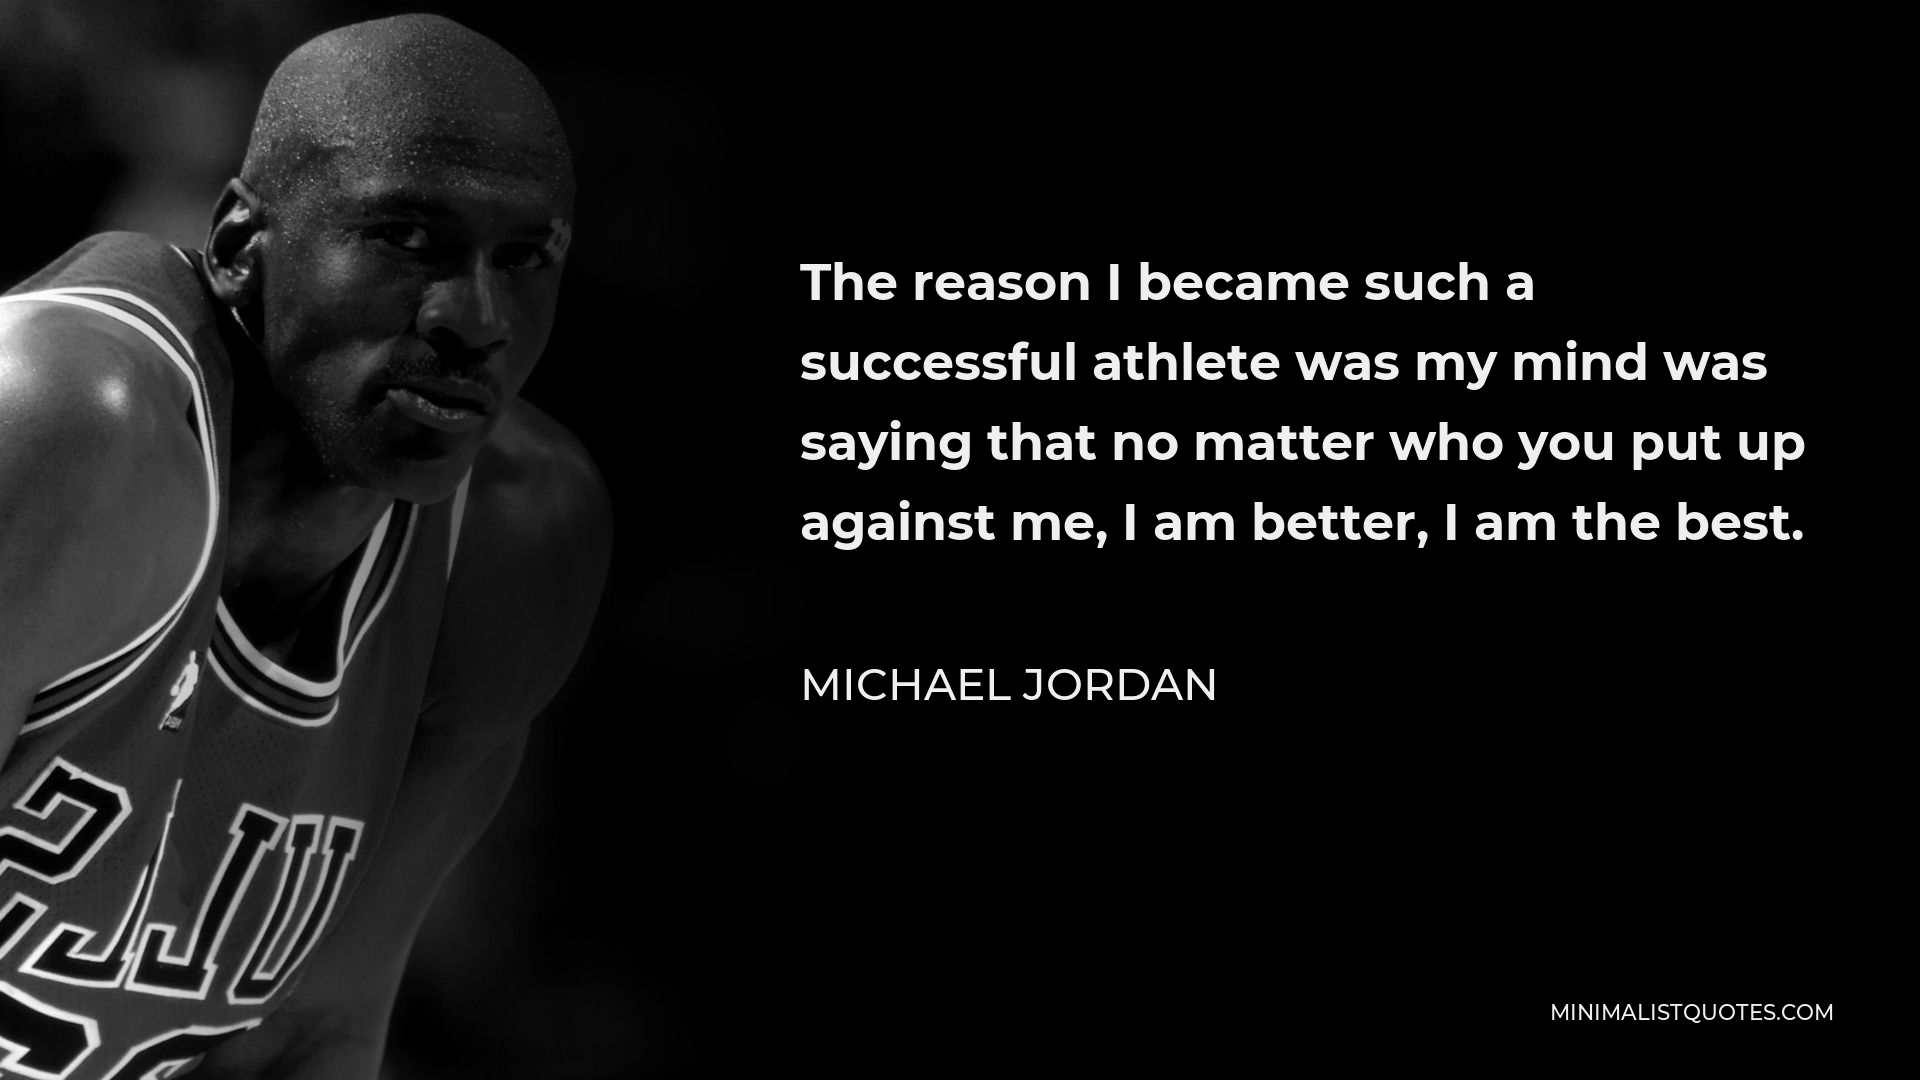 Michael Jordan Quote - The reason I became such a successful athlete was my mind was saying that no matter who you put up against me, I am better, I am the best.